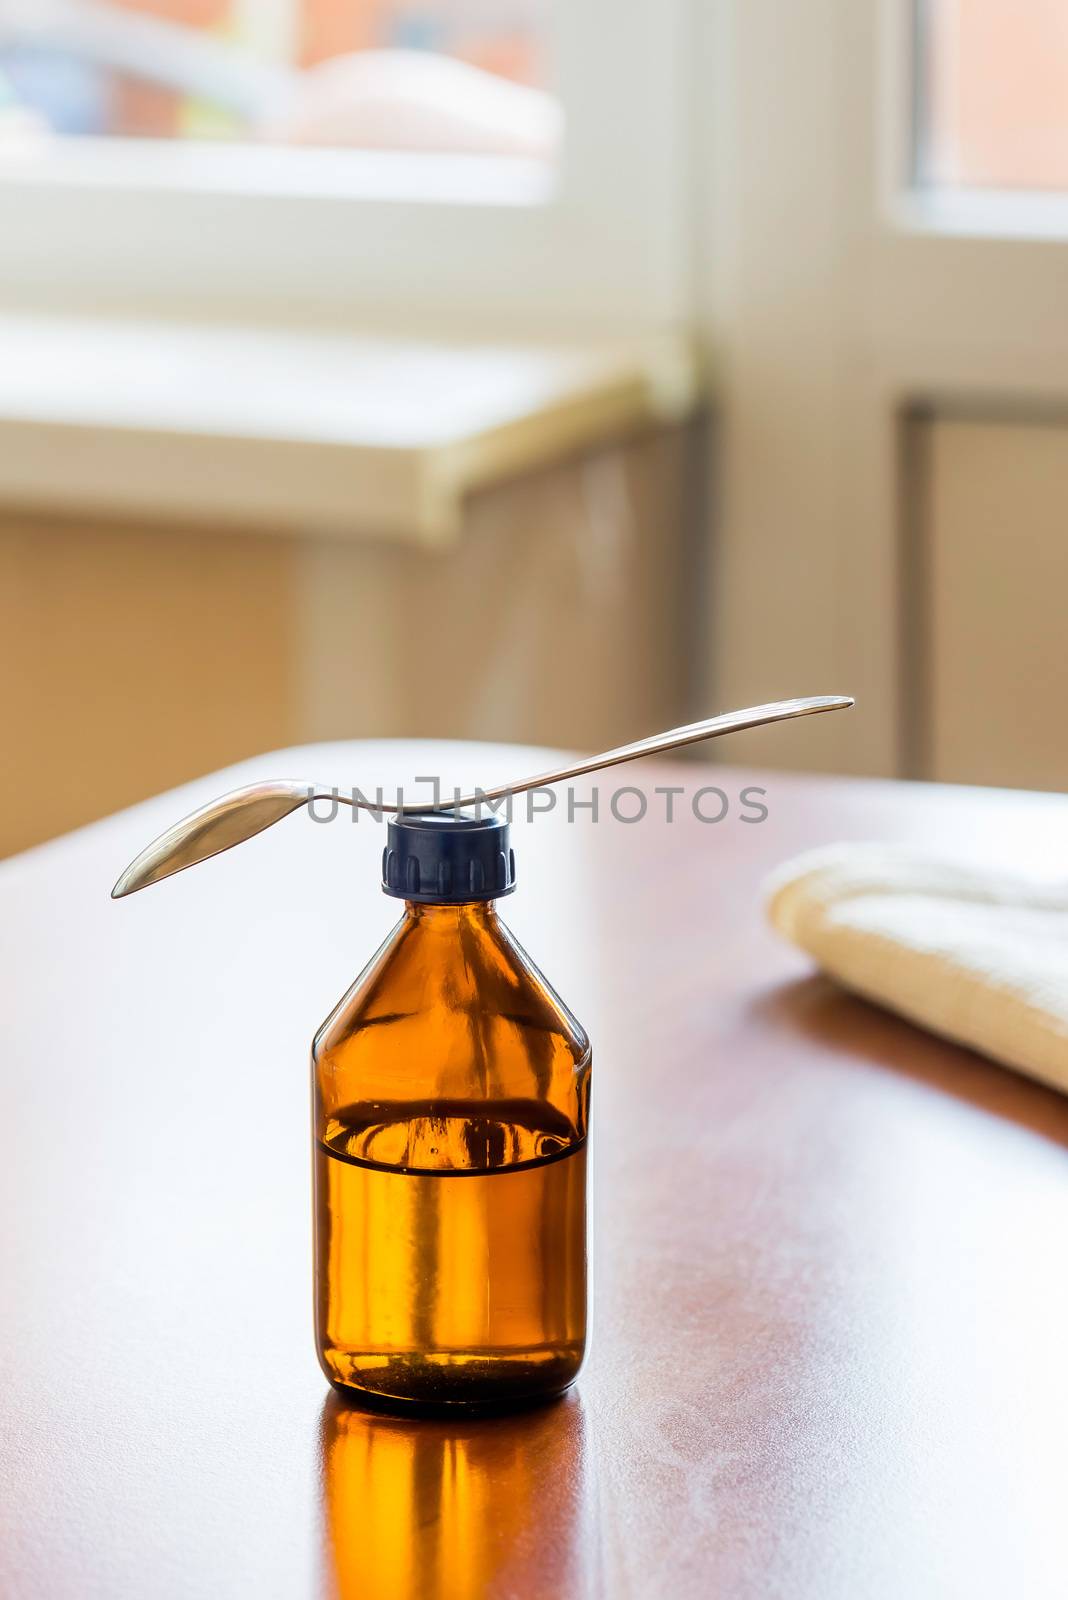 Cough Syrup Bottle With Spoon Close tothe Window by MaxalTamor